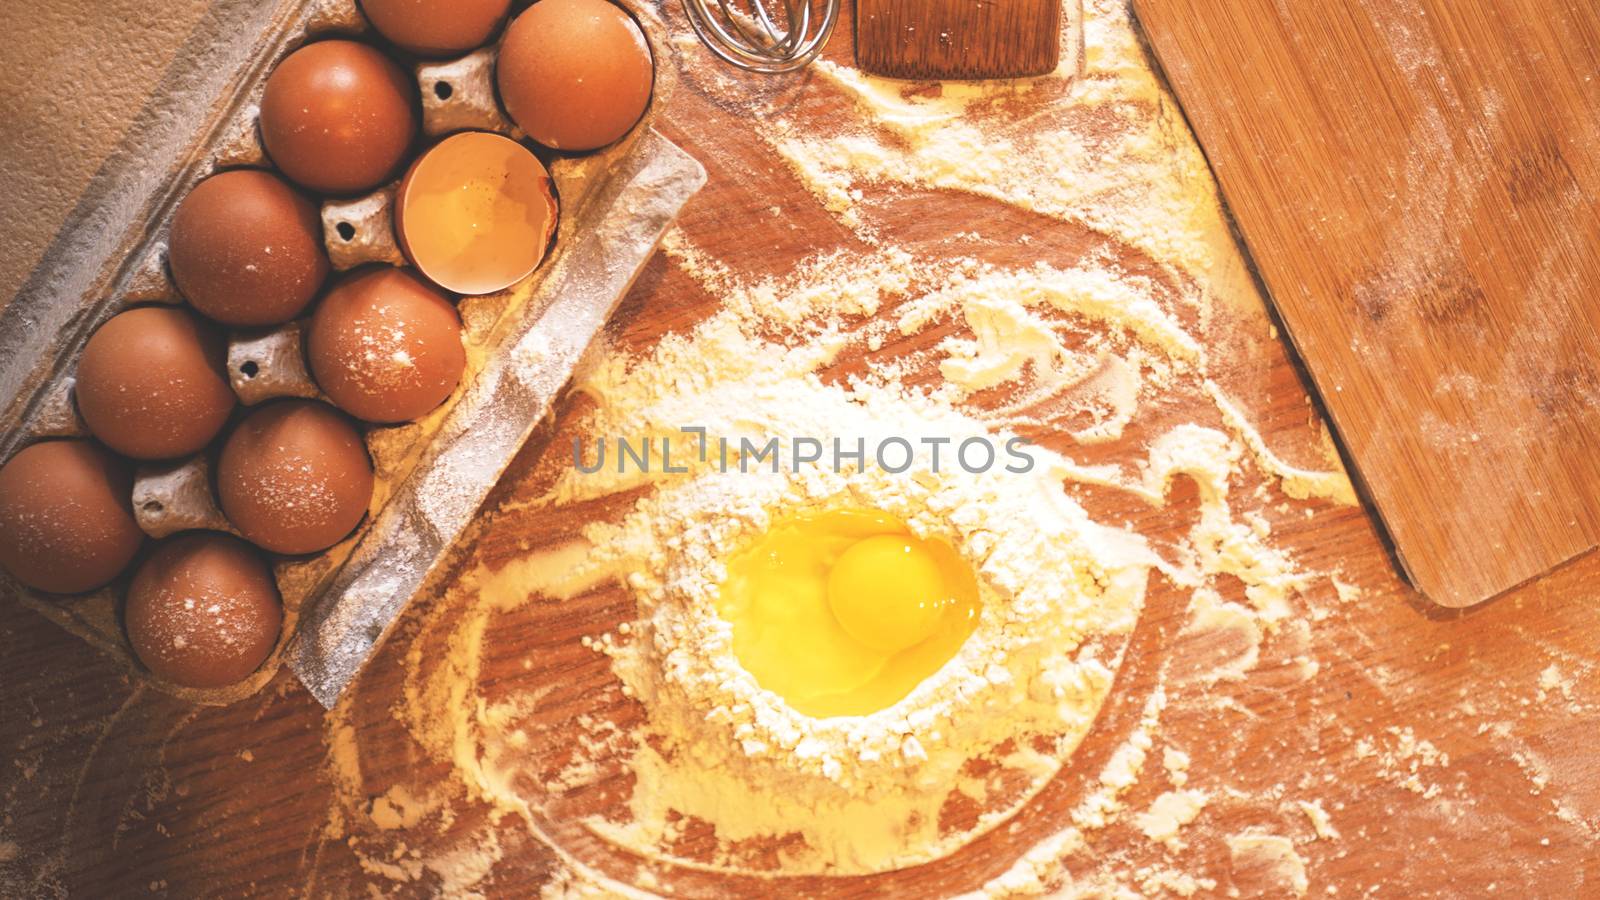 Ingredients and utensils for baking on a pastel wooden background, top view. Concept of kitchen, cooking and Easter